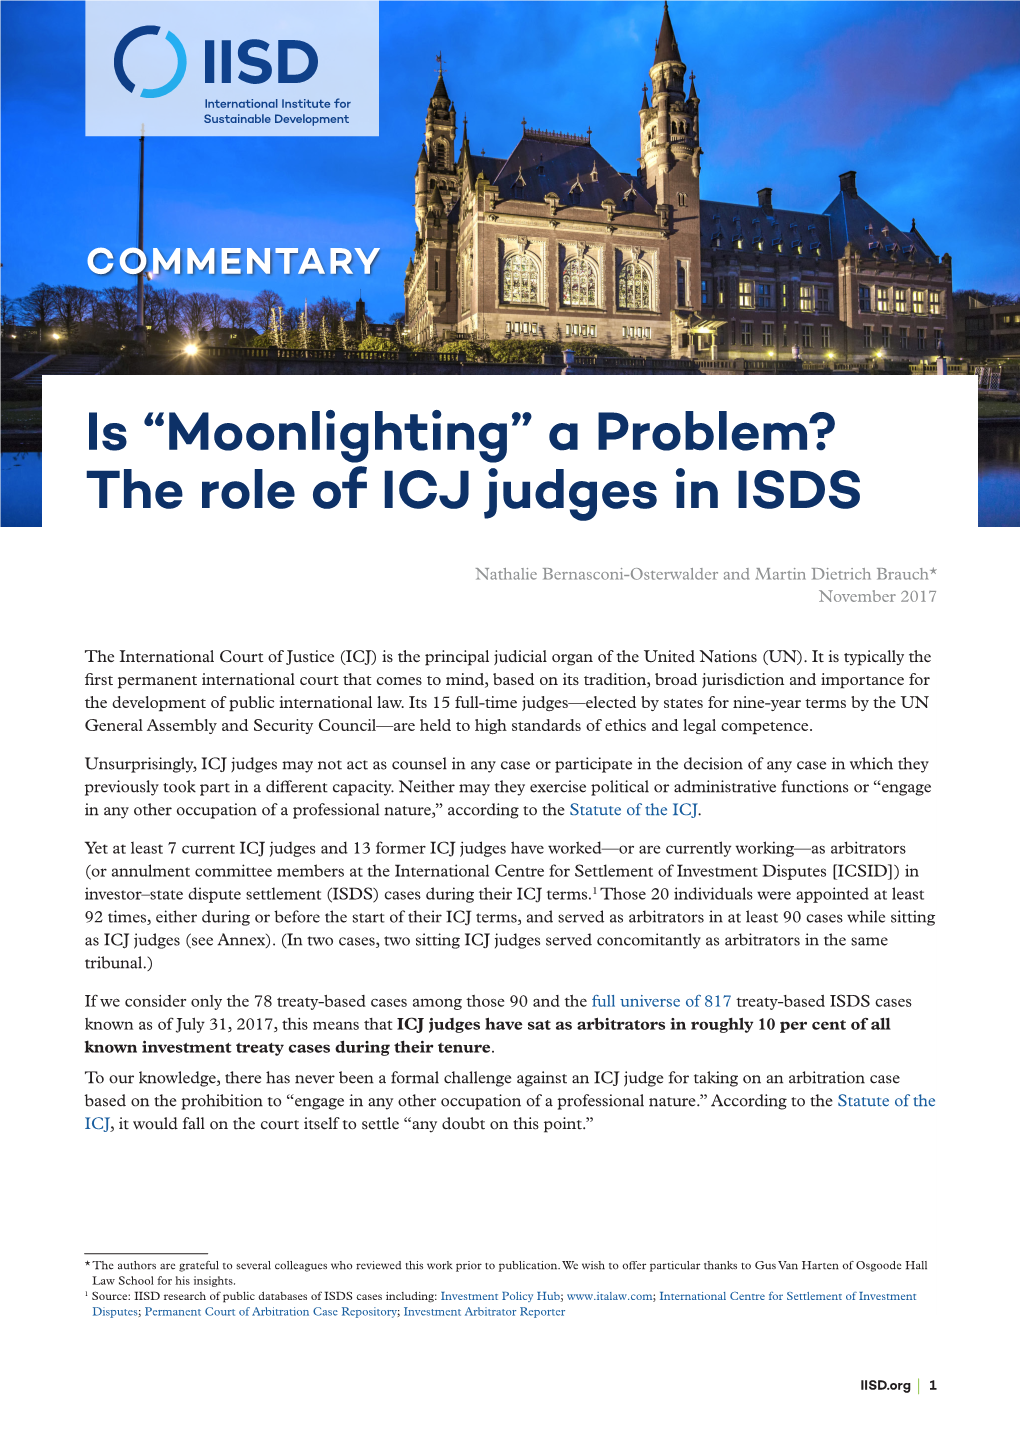 Is "Moonlighting" a Problem? the Role of ICJ Judges in ISDS